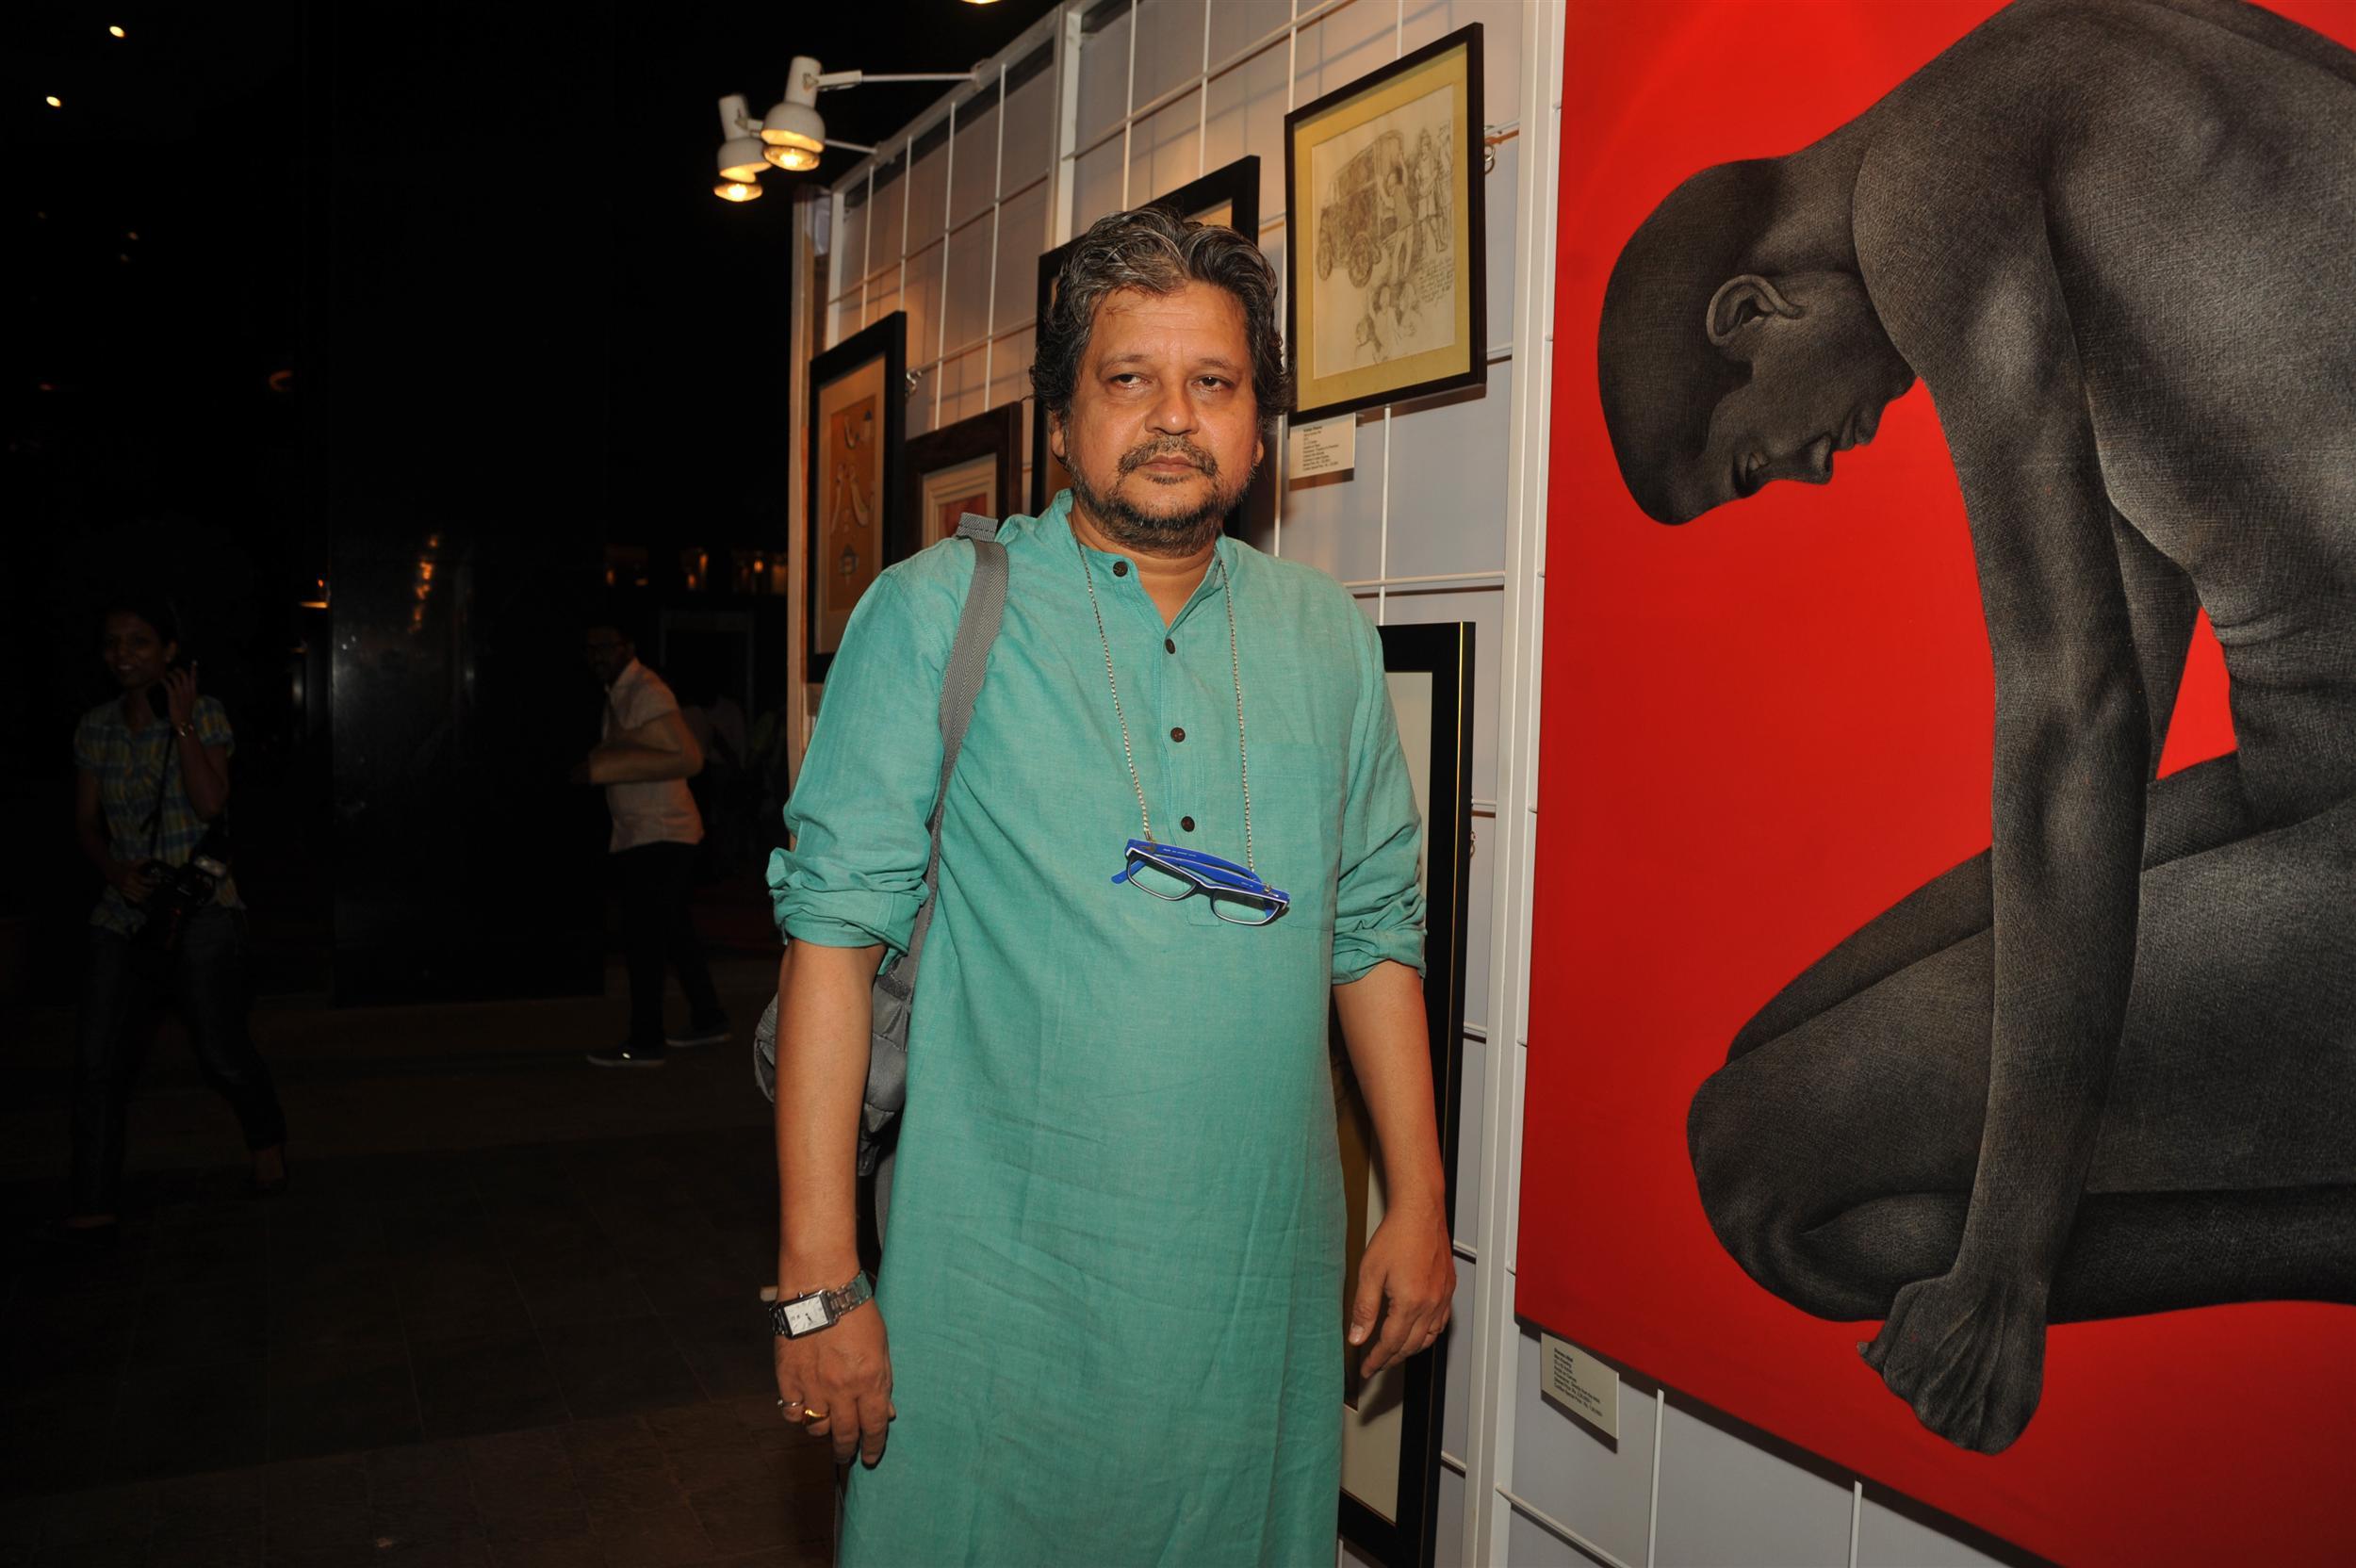 Celebs at 3rd Annual Charity Fundraiser Art Exhibition